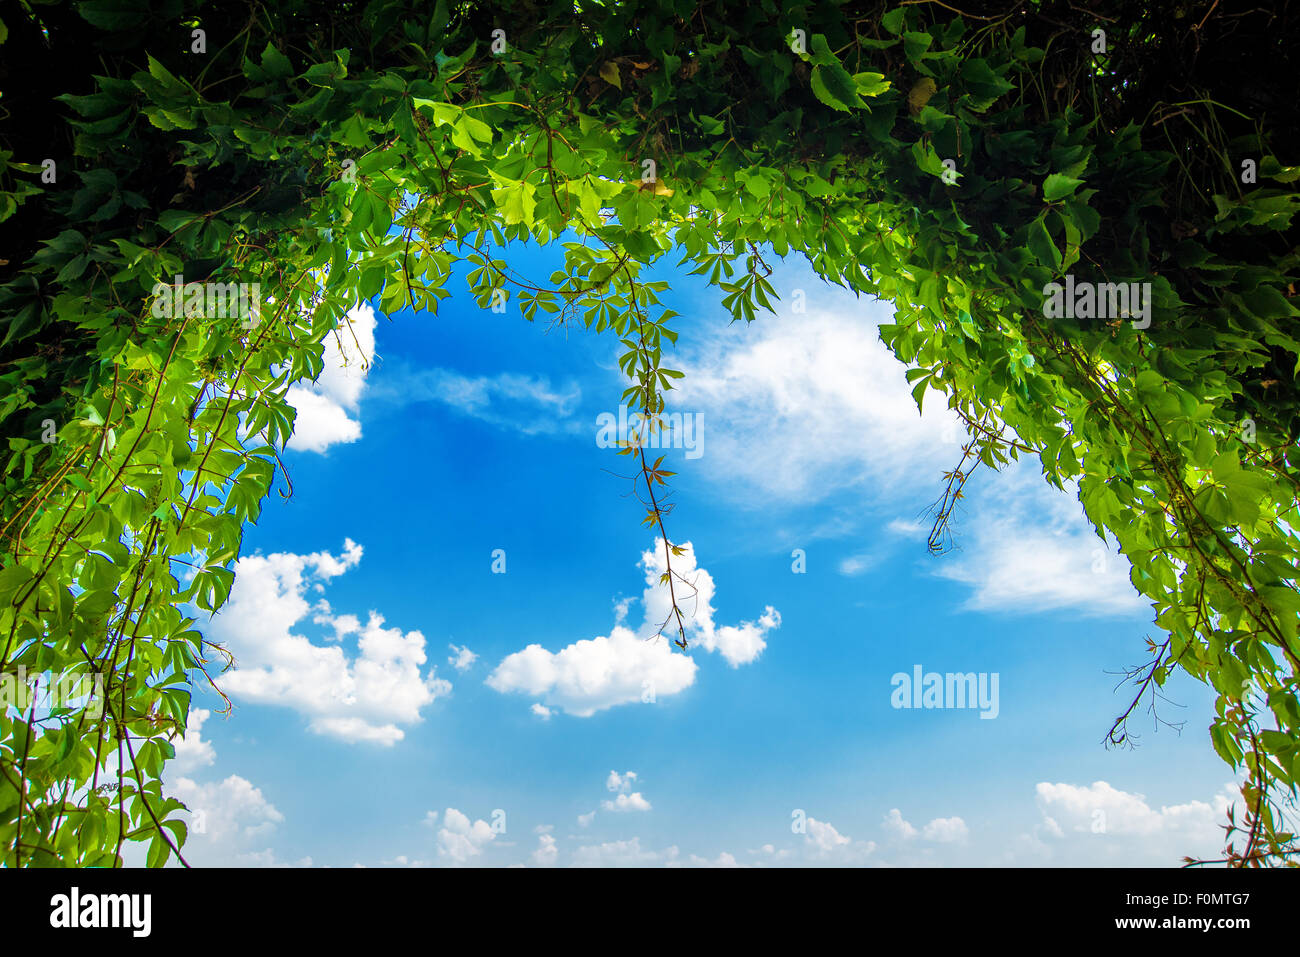 Green garden arch, archway at the end of the green plant tunnel, blue sky and bright sunny day Stock Photo